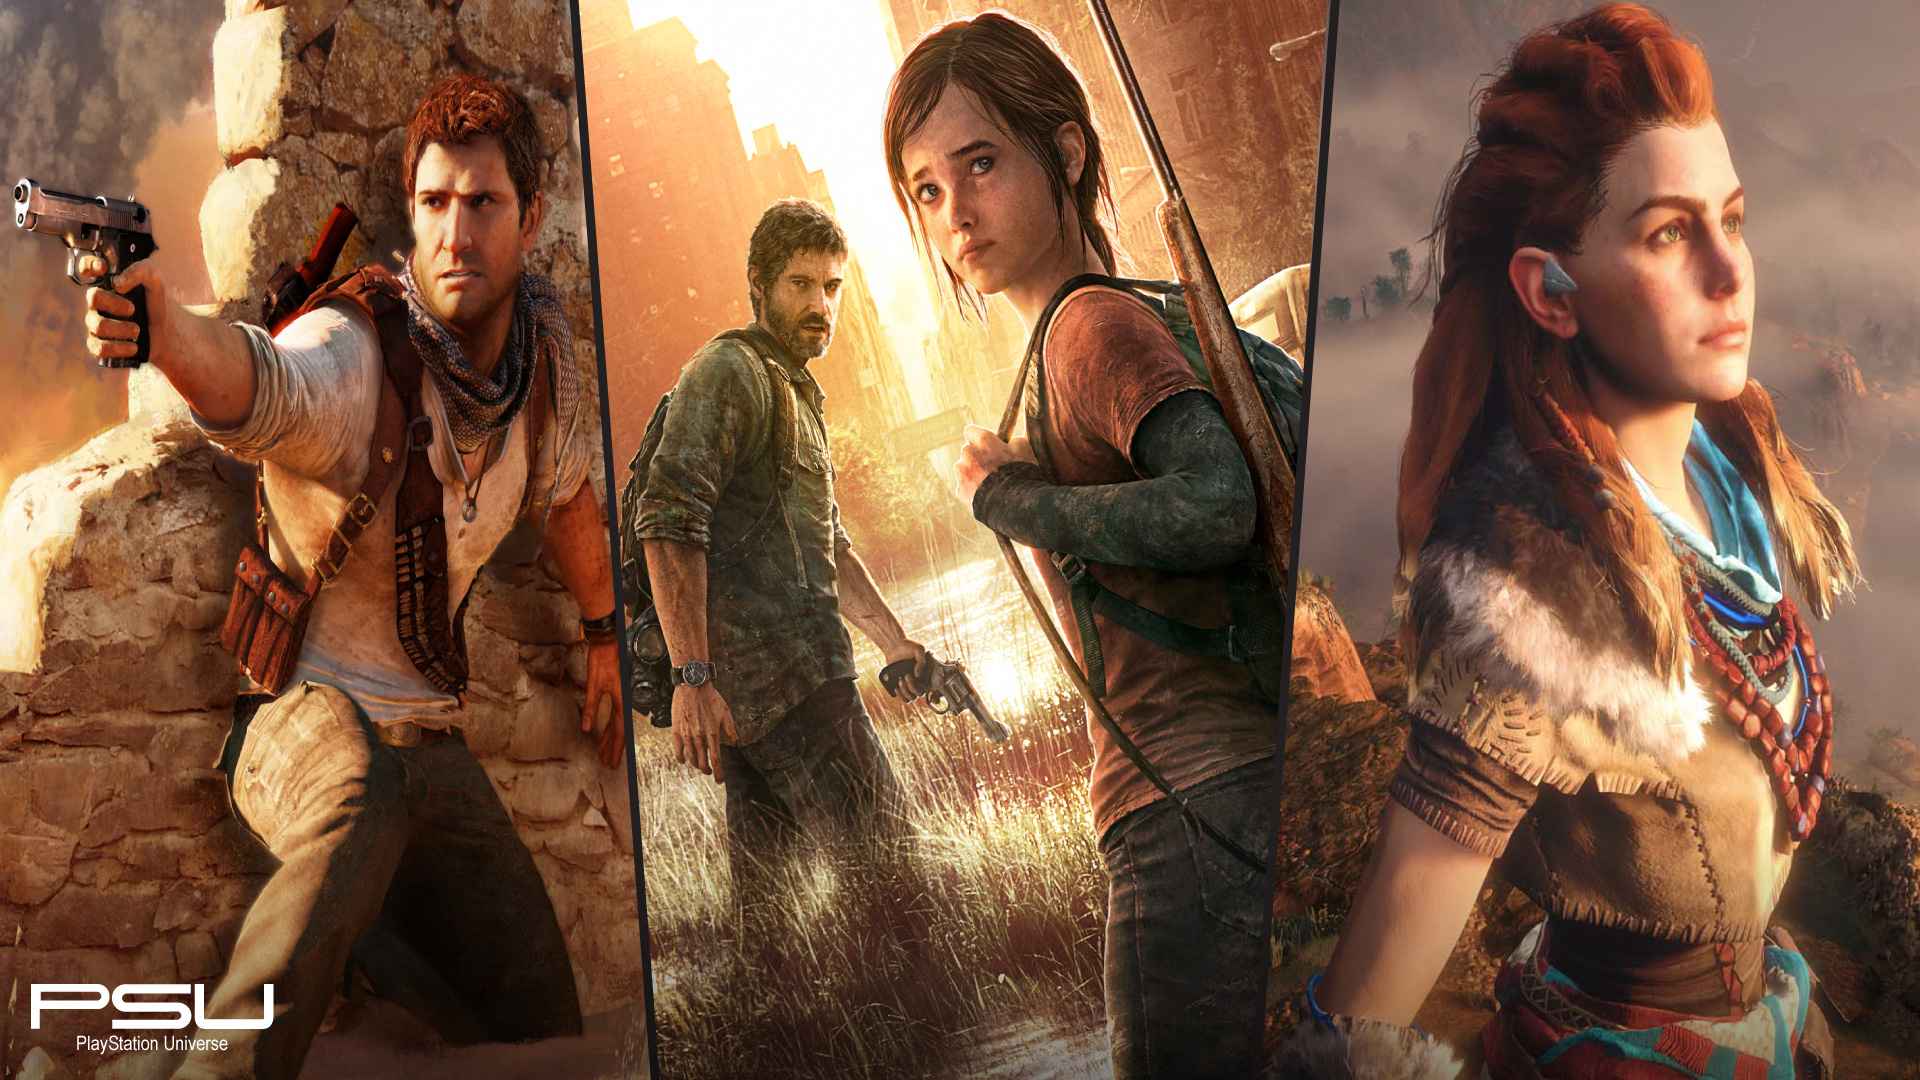 1920x1080 the last of us wallpaper hd pc download  The last of us, Last of  us remastered, Uncharted